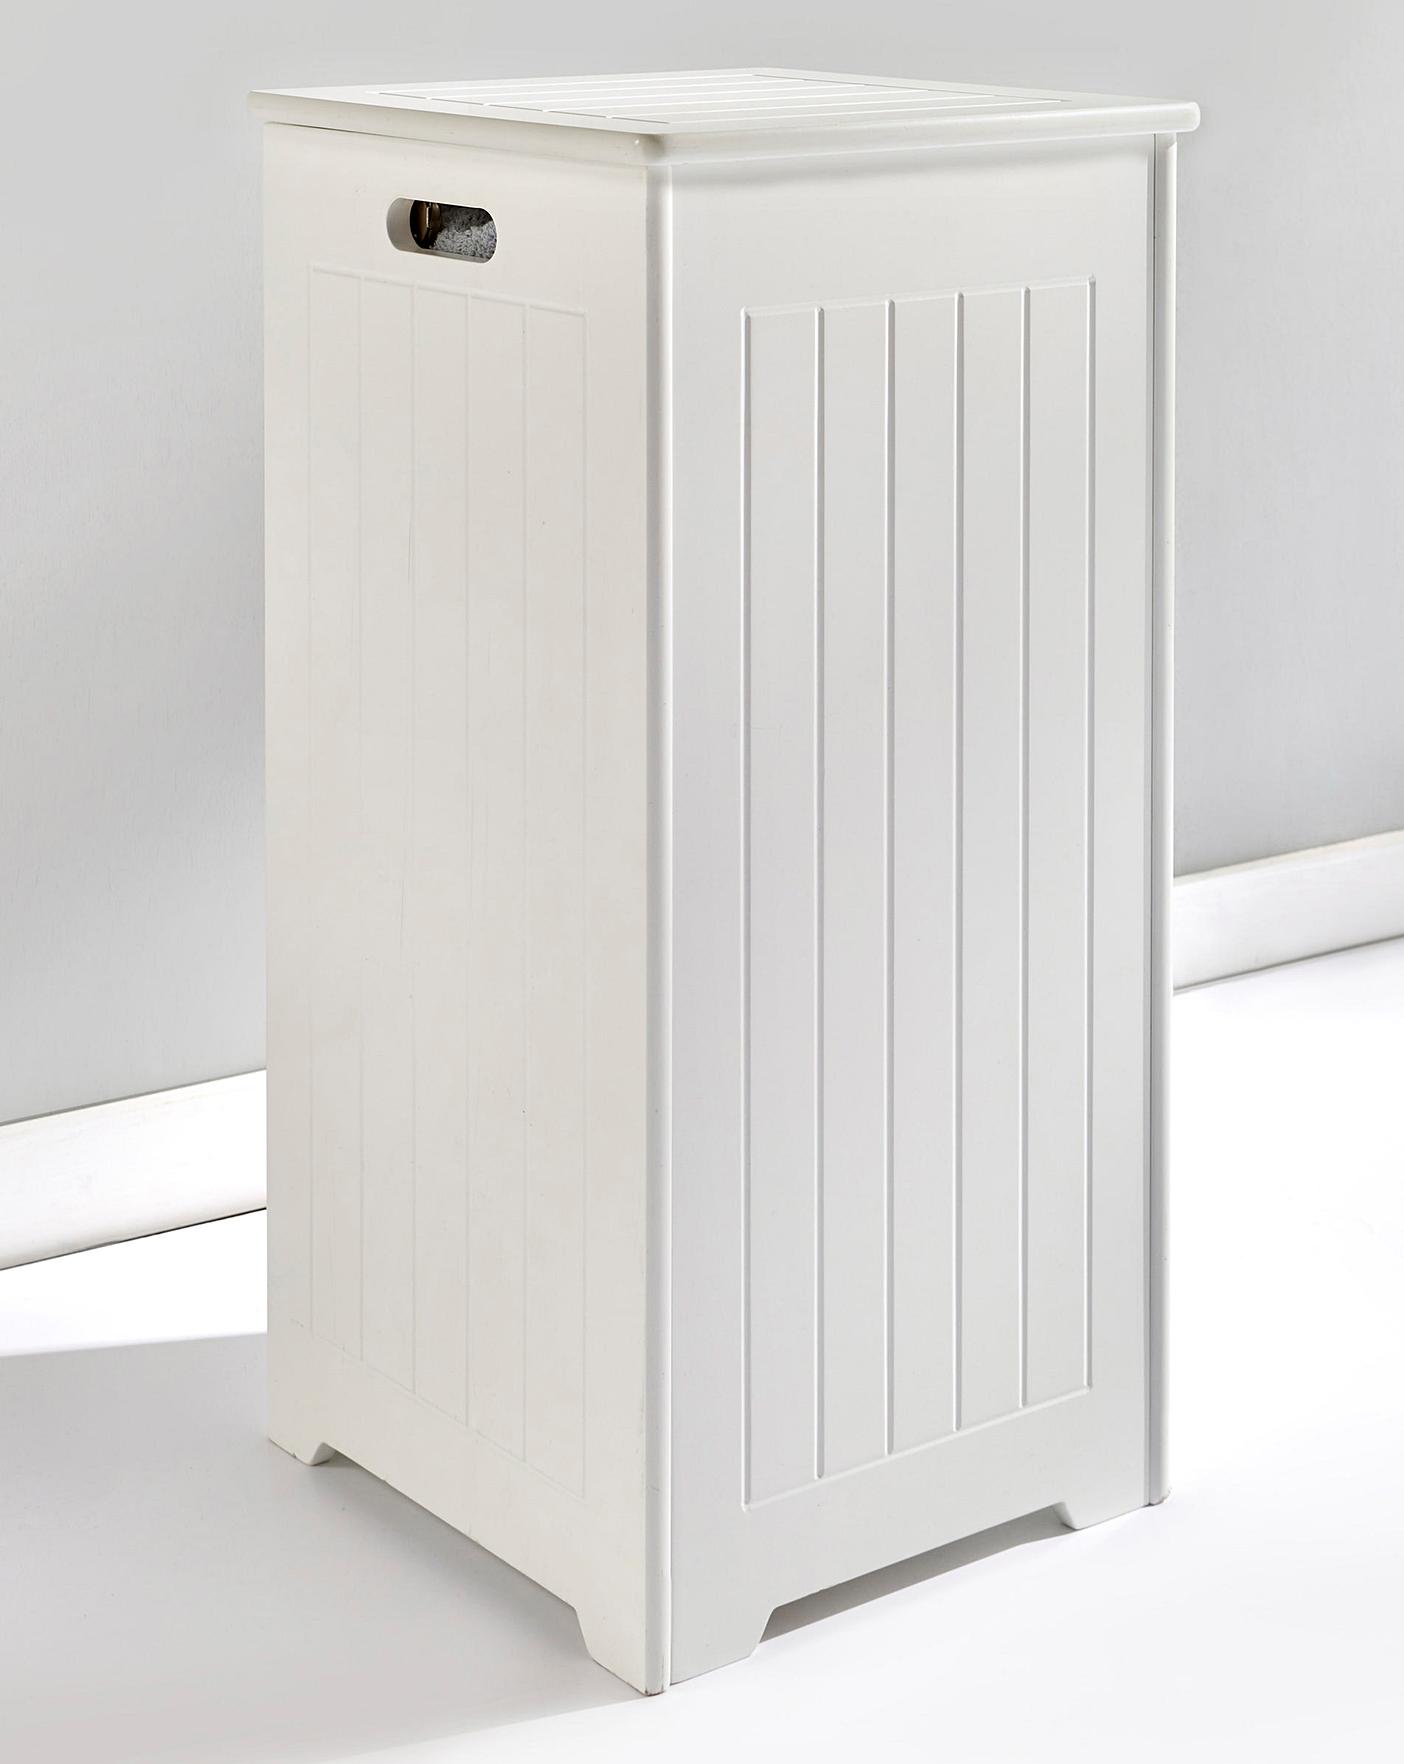 Wooden Laundry Basket, White Wooden Laundry Bin With Lid